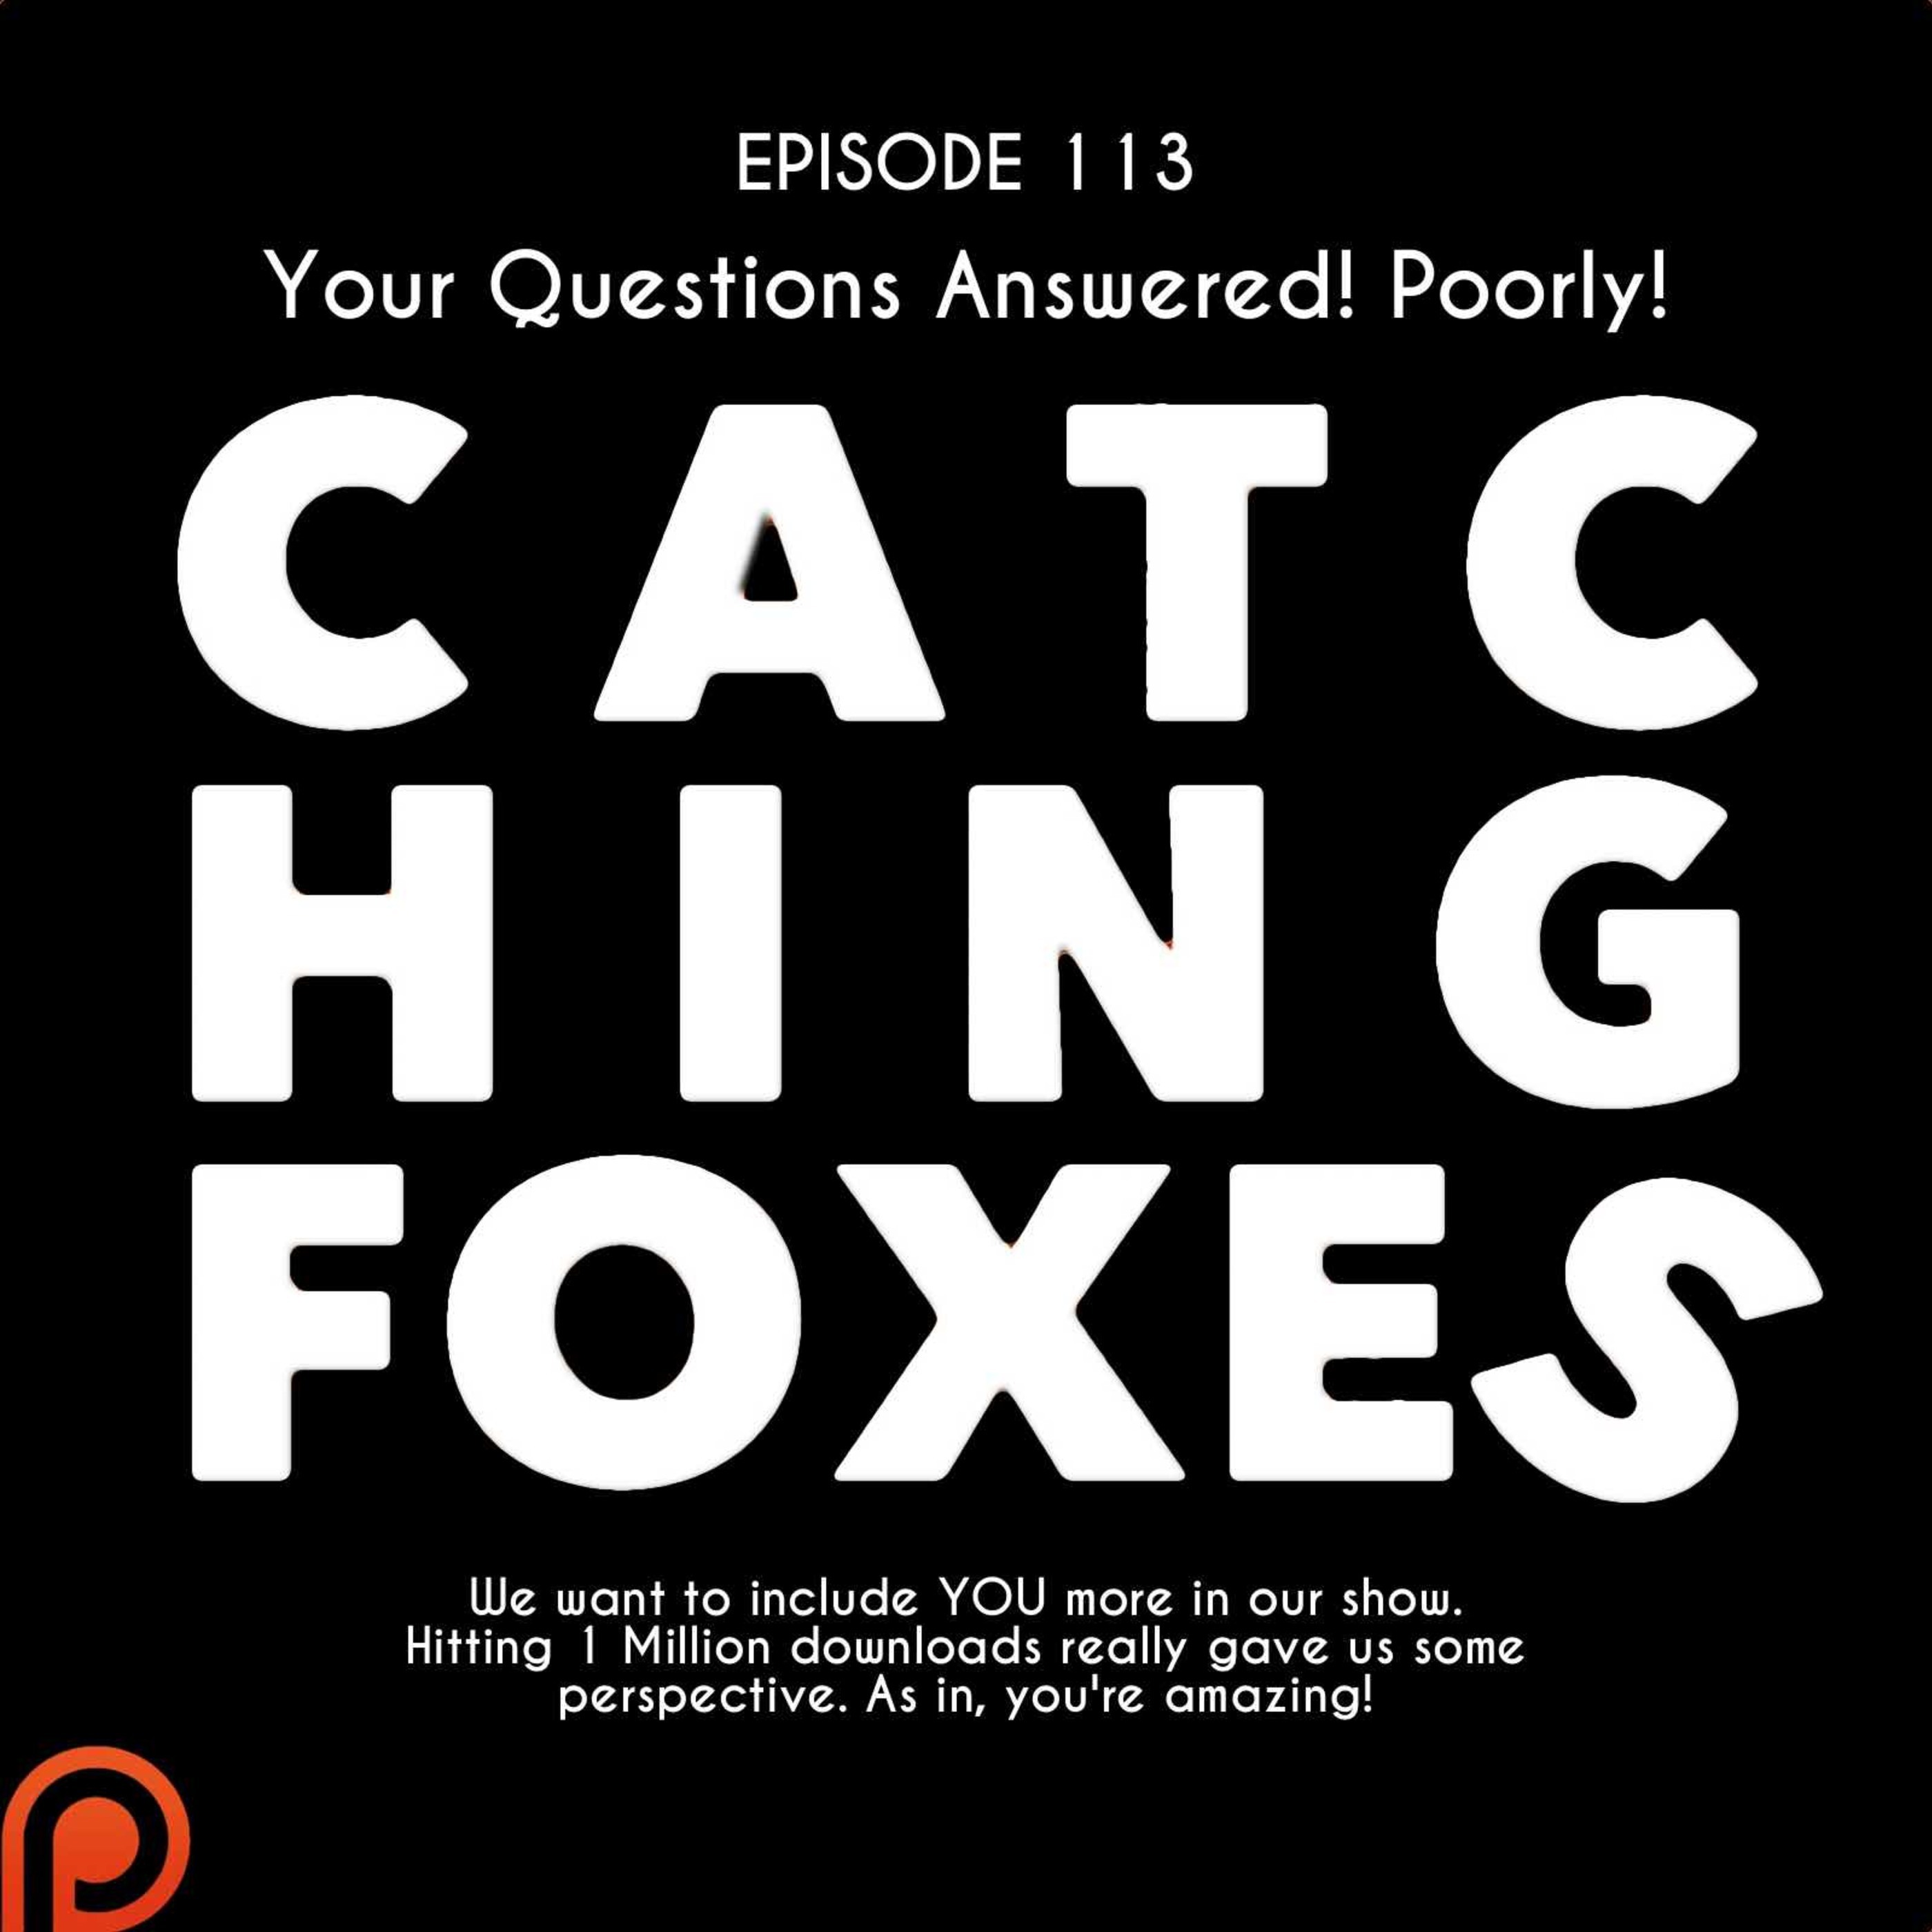 Episode 113: Your Questions Answered! Poorly!